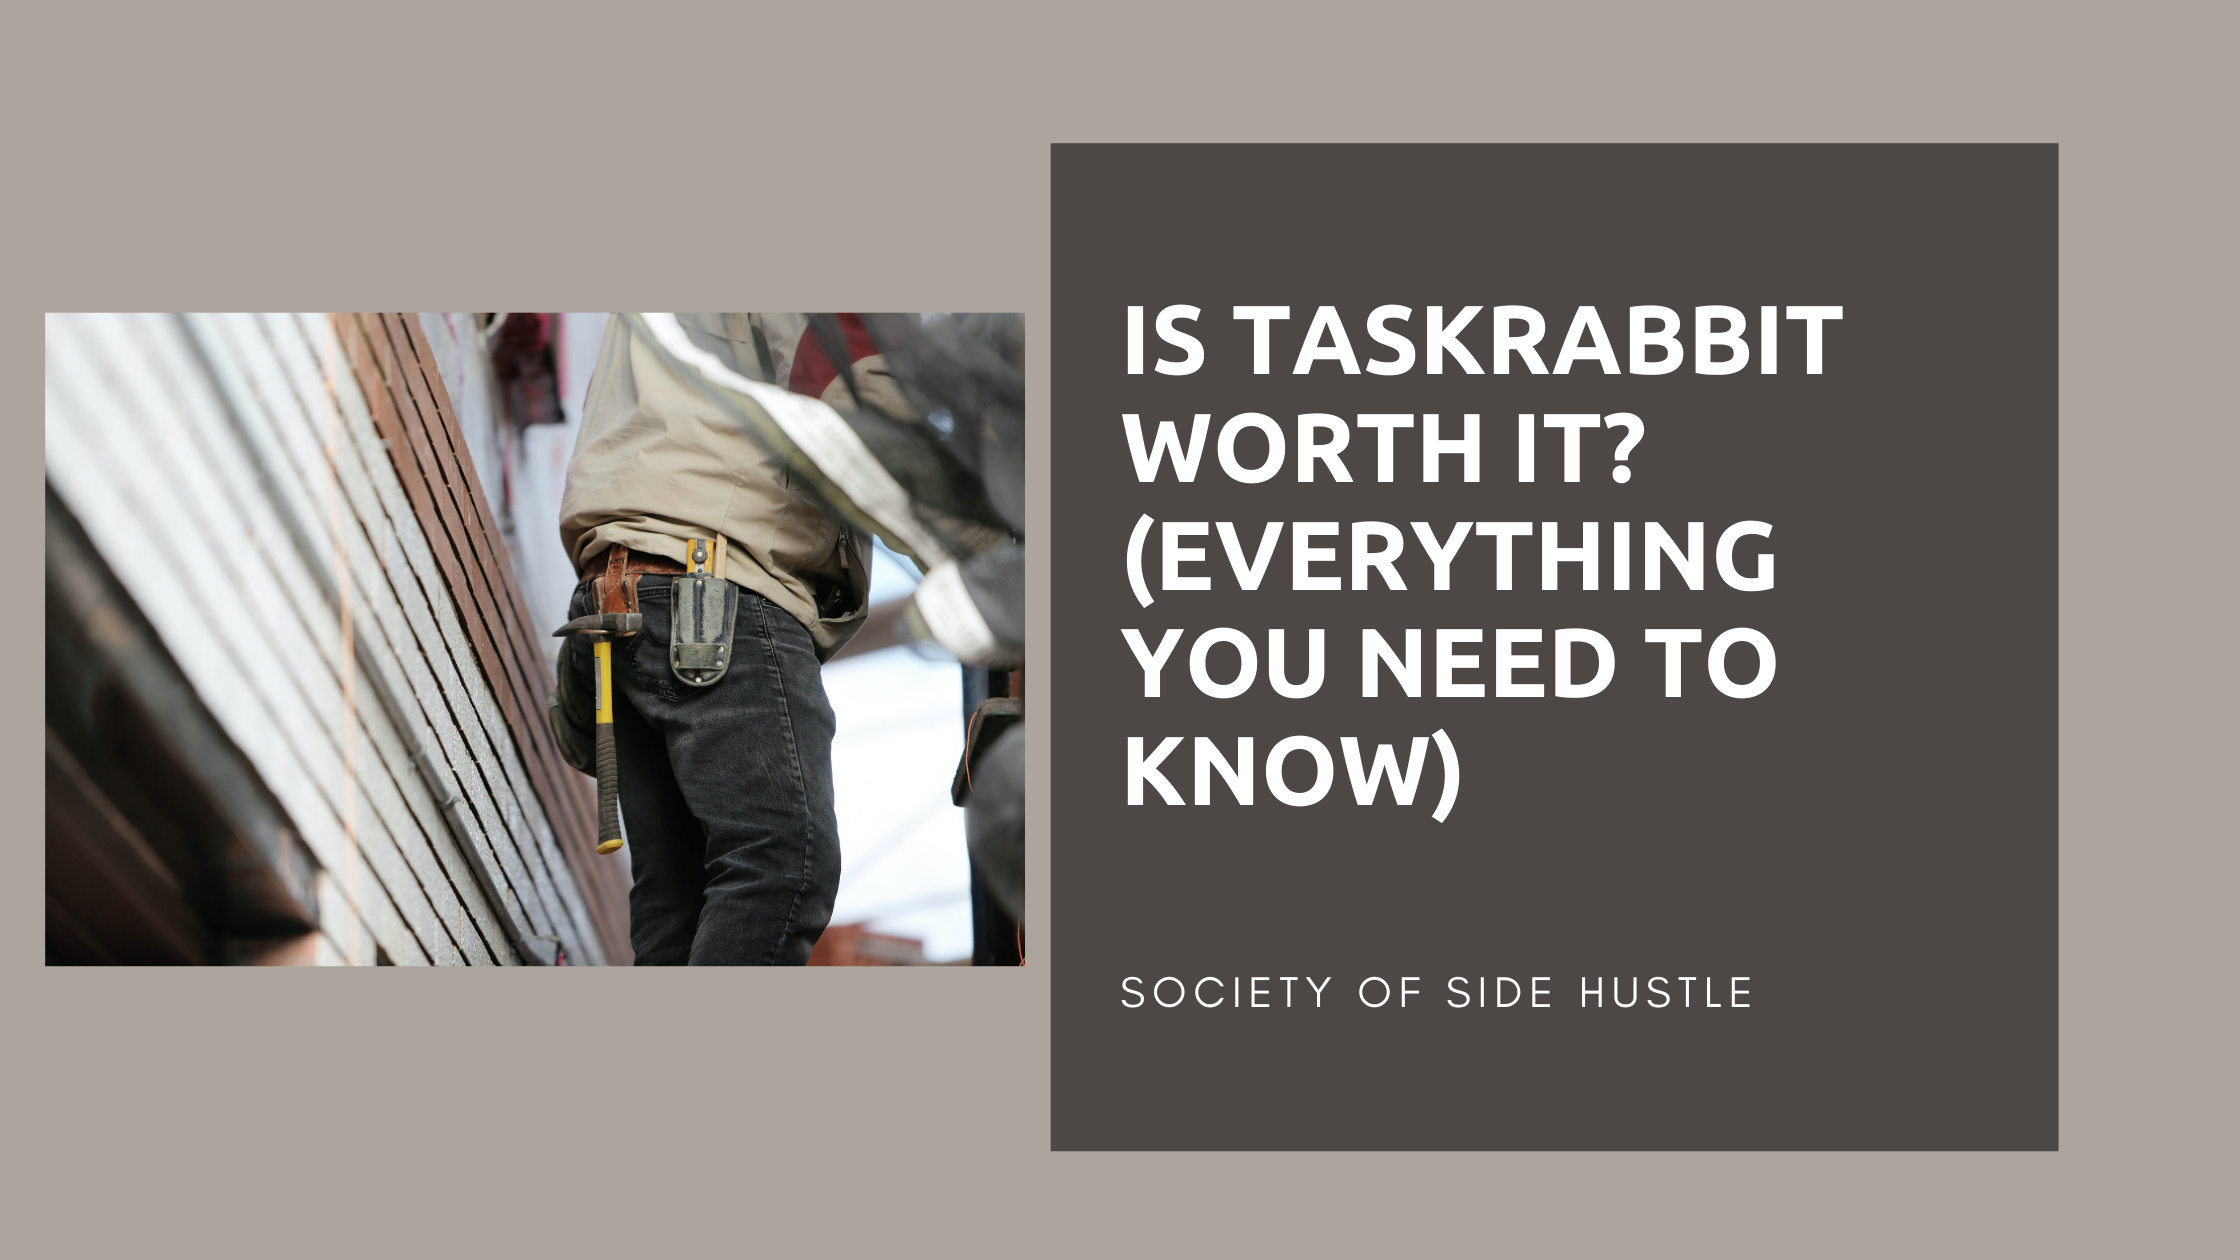 Is TaskRabbit worth it? (Things You Need To Know)